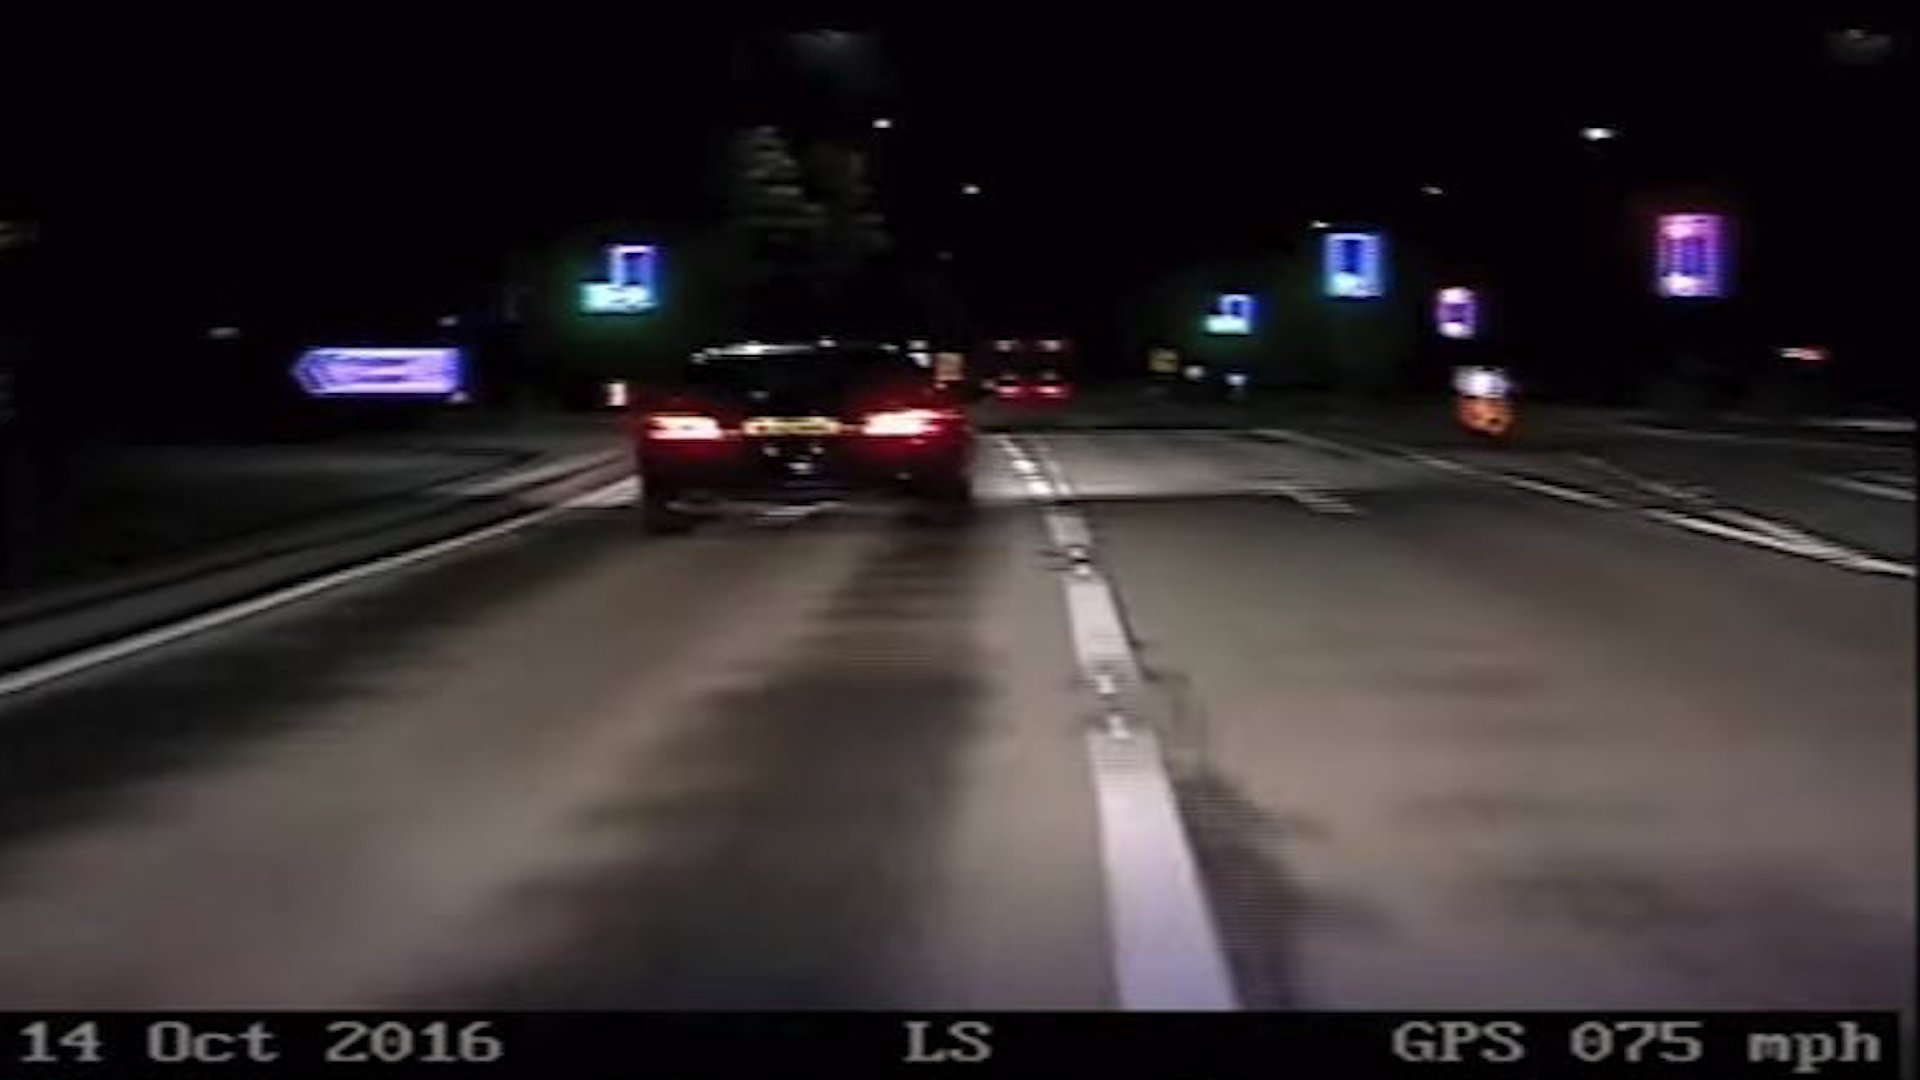 VIDEO: Police release footage of pursuit and tazering of former Rugby League player